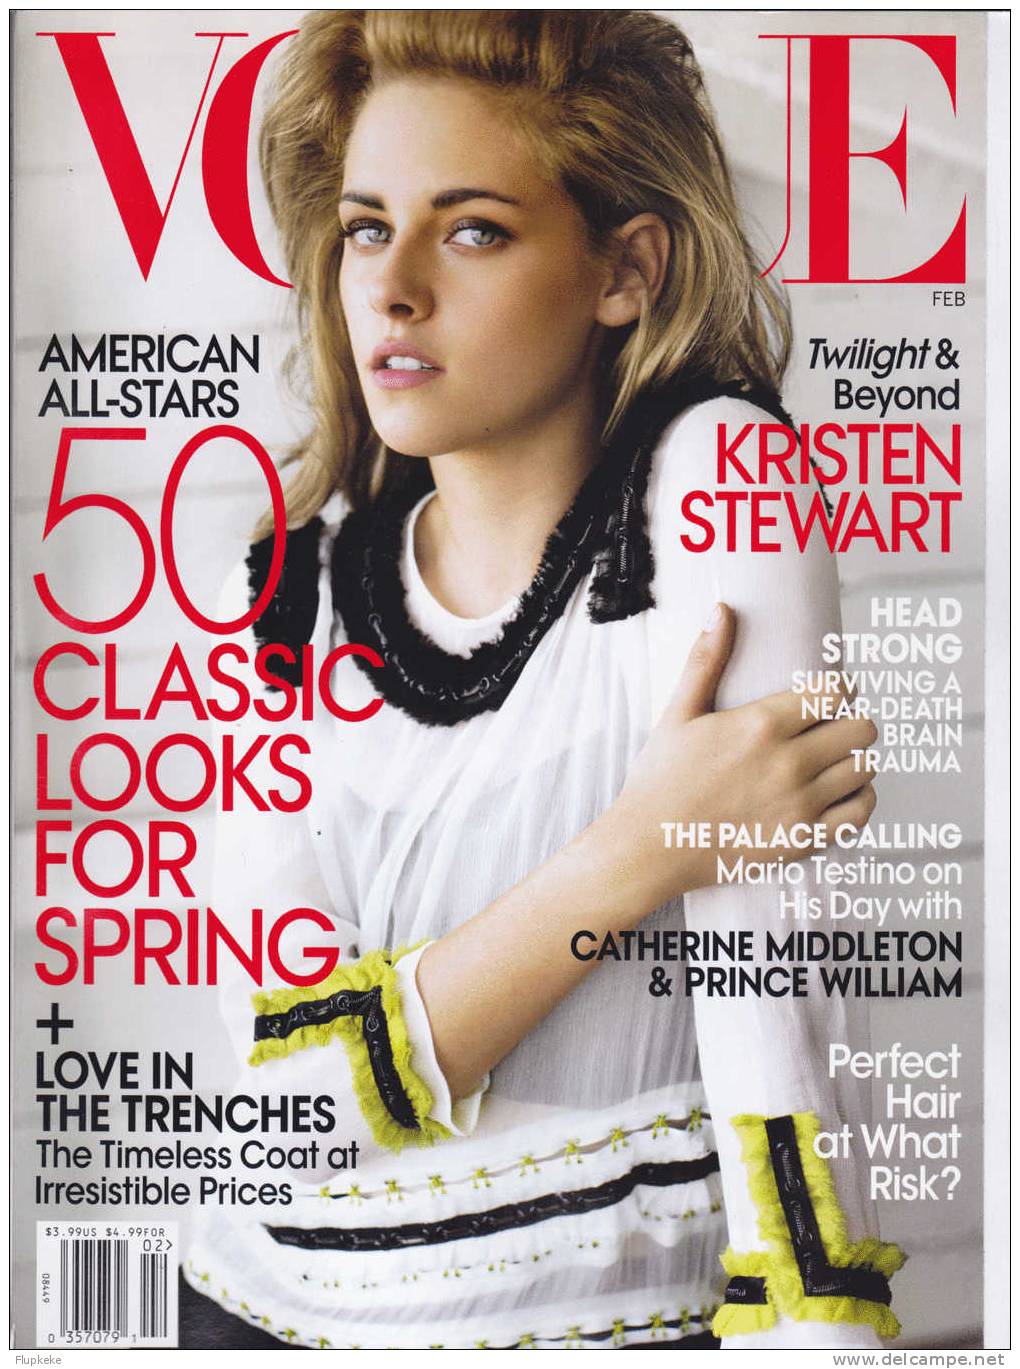 Vogue February 2011 American All-Star 50 Classic Looks For Spring Cover Kristen Stewart - Divertimento